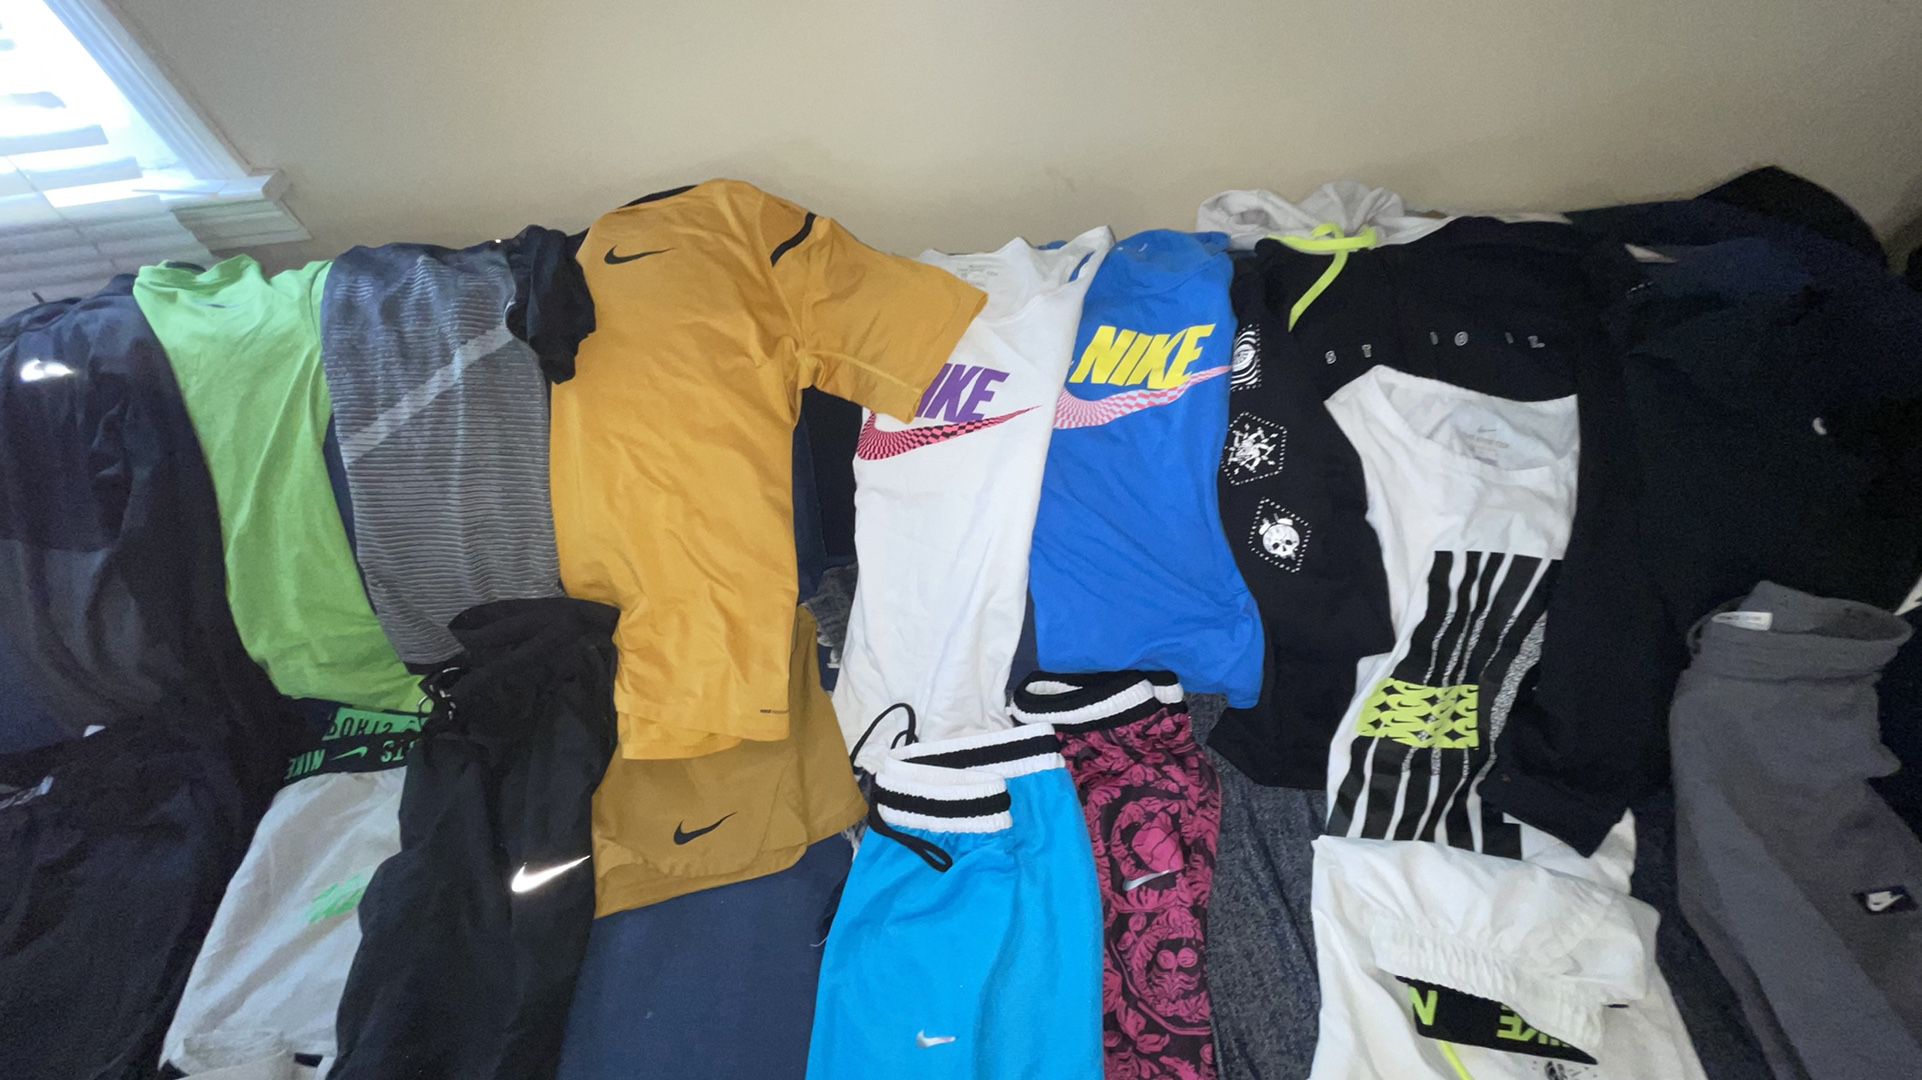 NIKE, Women’s (Med/Sm) Lillie Pulitzer, Calia, Nike, Under Armour, Adidas And Patagonia Apparel! Many For Men’s Too!